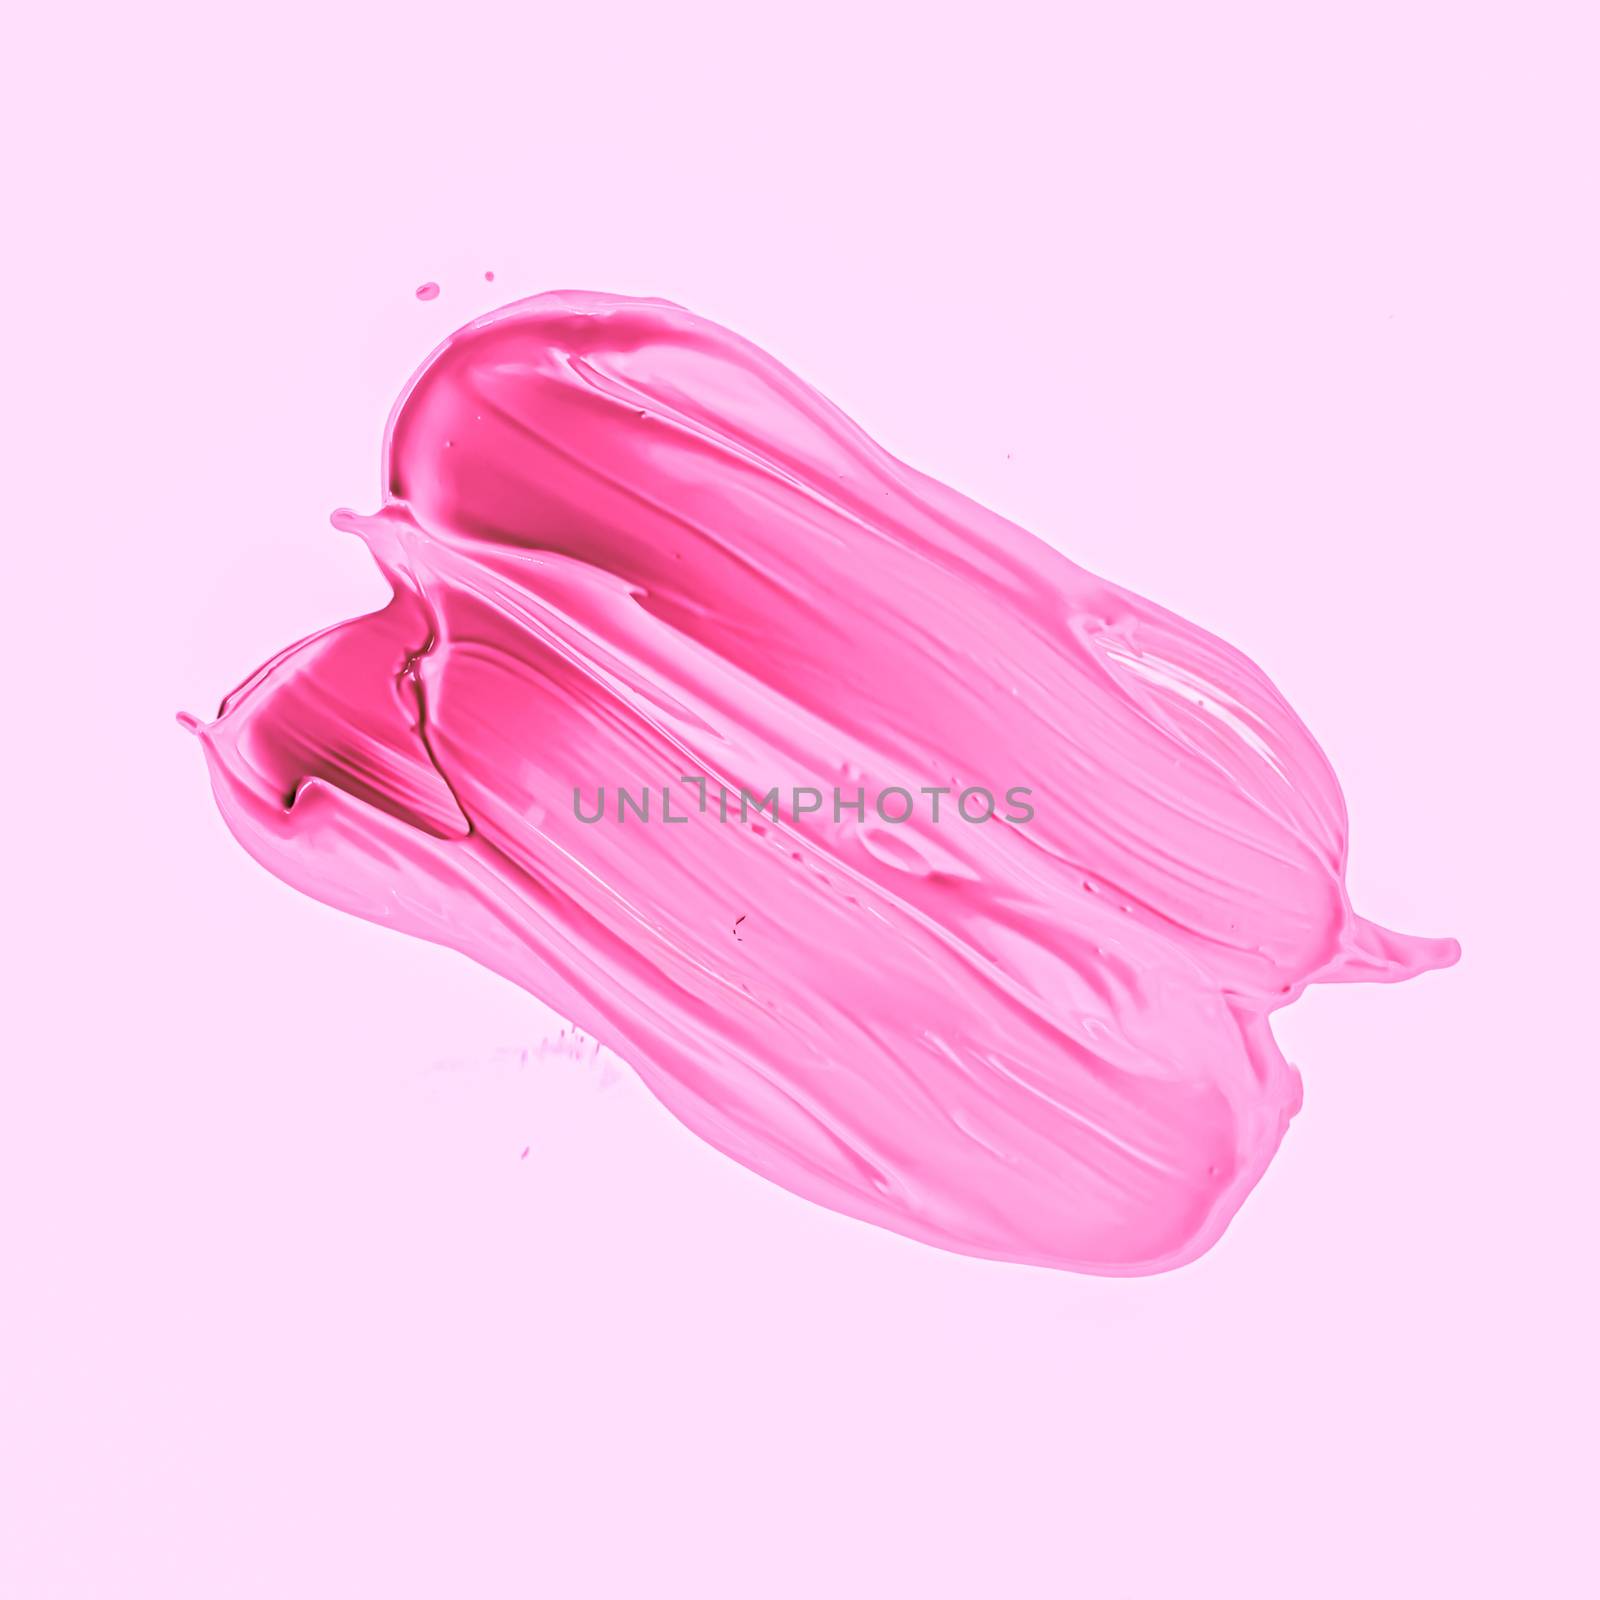 Pink brush stroke or makeup smudge closeup, beauty cosmetics and lipstick textures